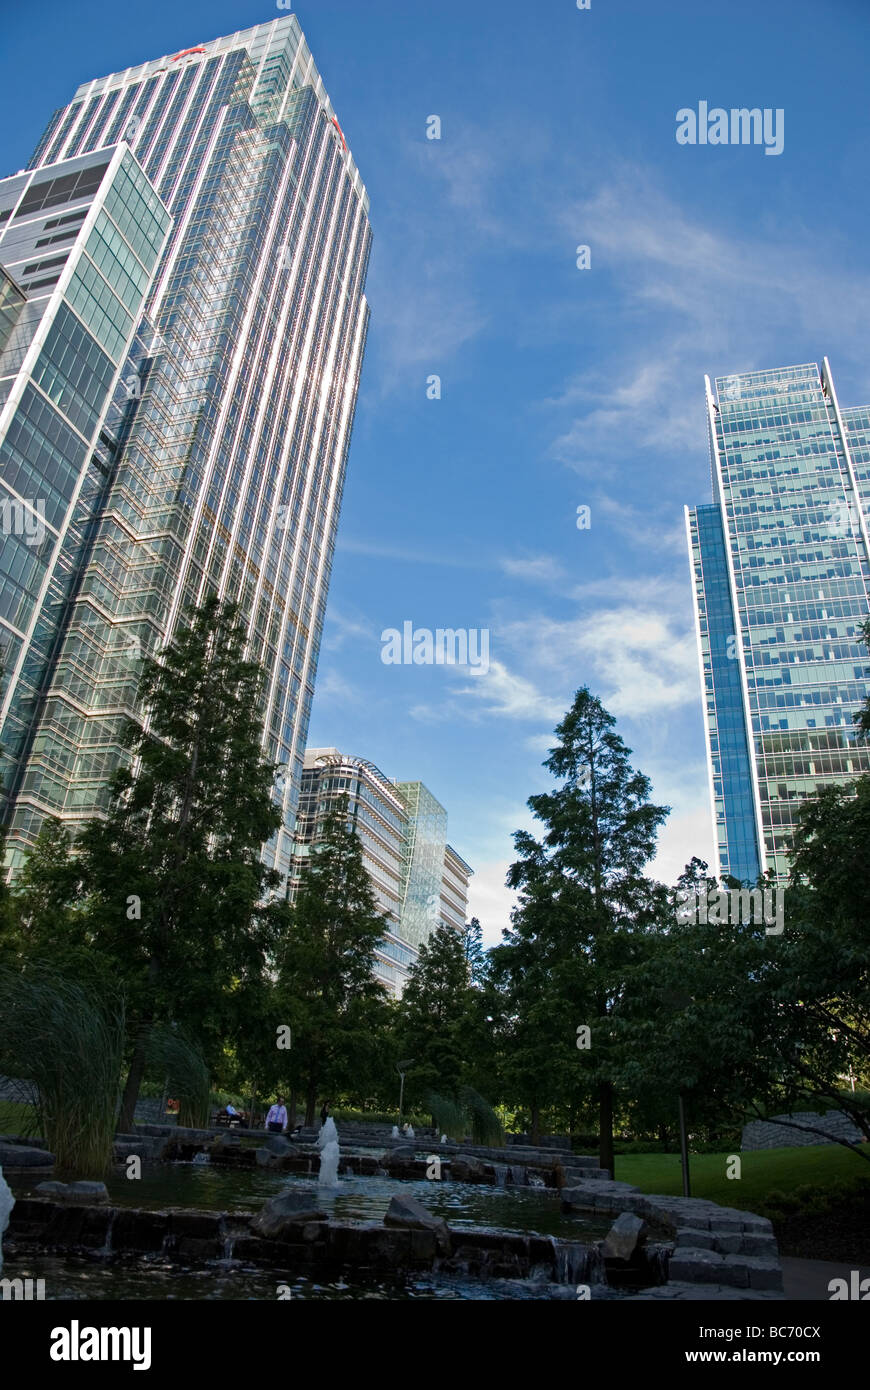 View of towers in Jubilee Park, Canary Wharf Dockland London England UK Stock Photo